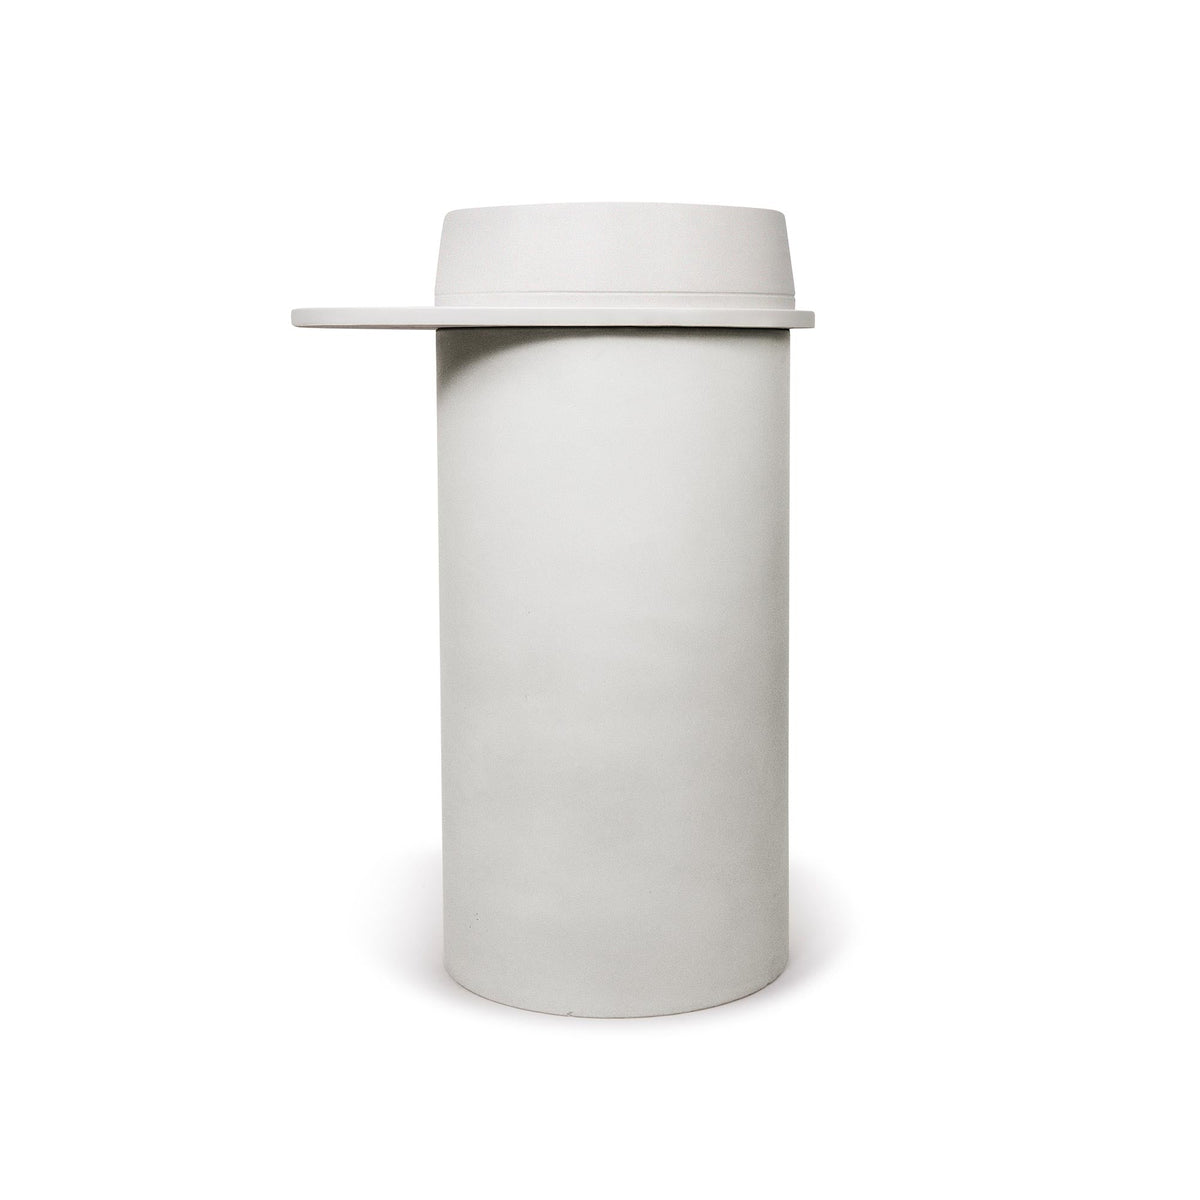 Cylinder with Tray - Funl Basin (Sky Grey,Charcoal)